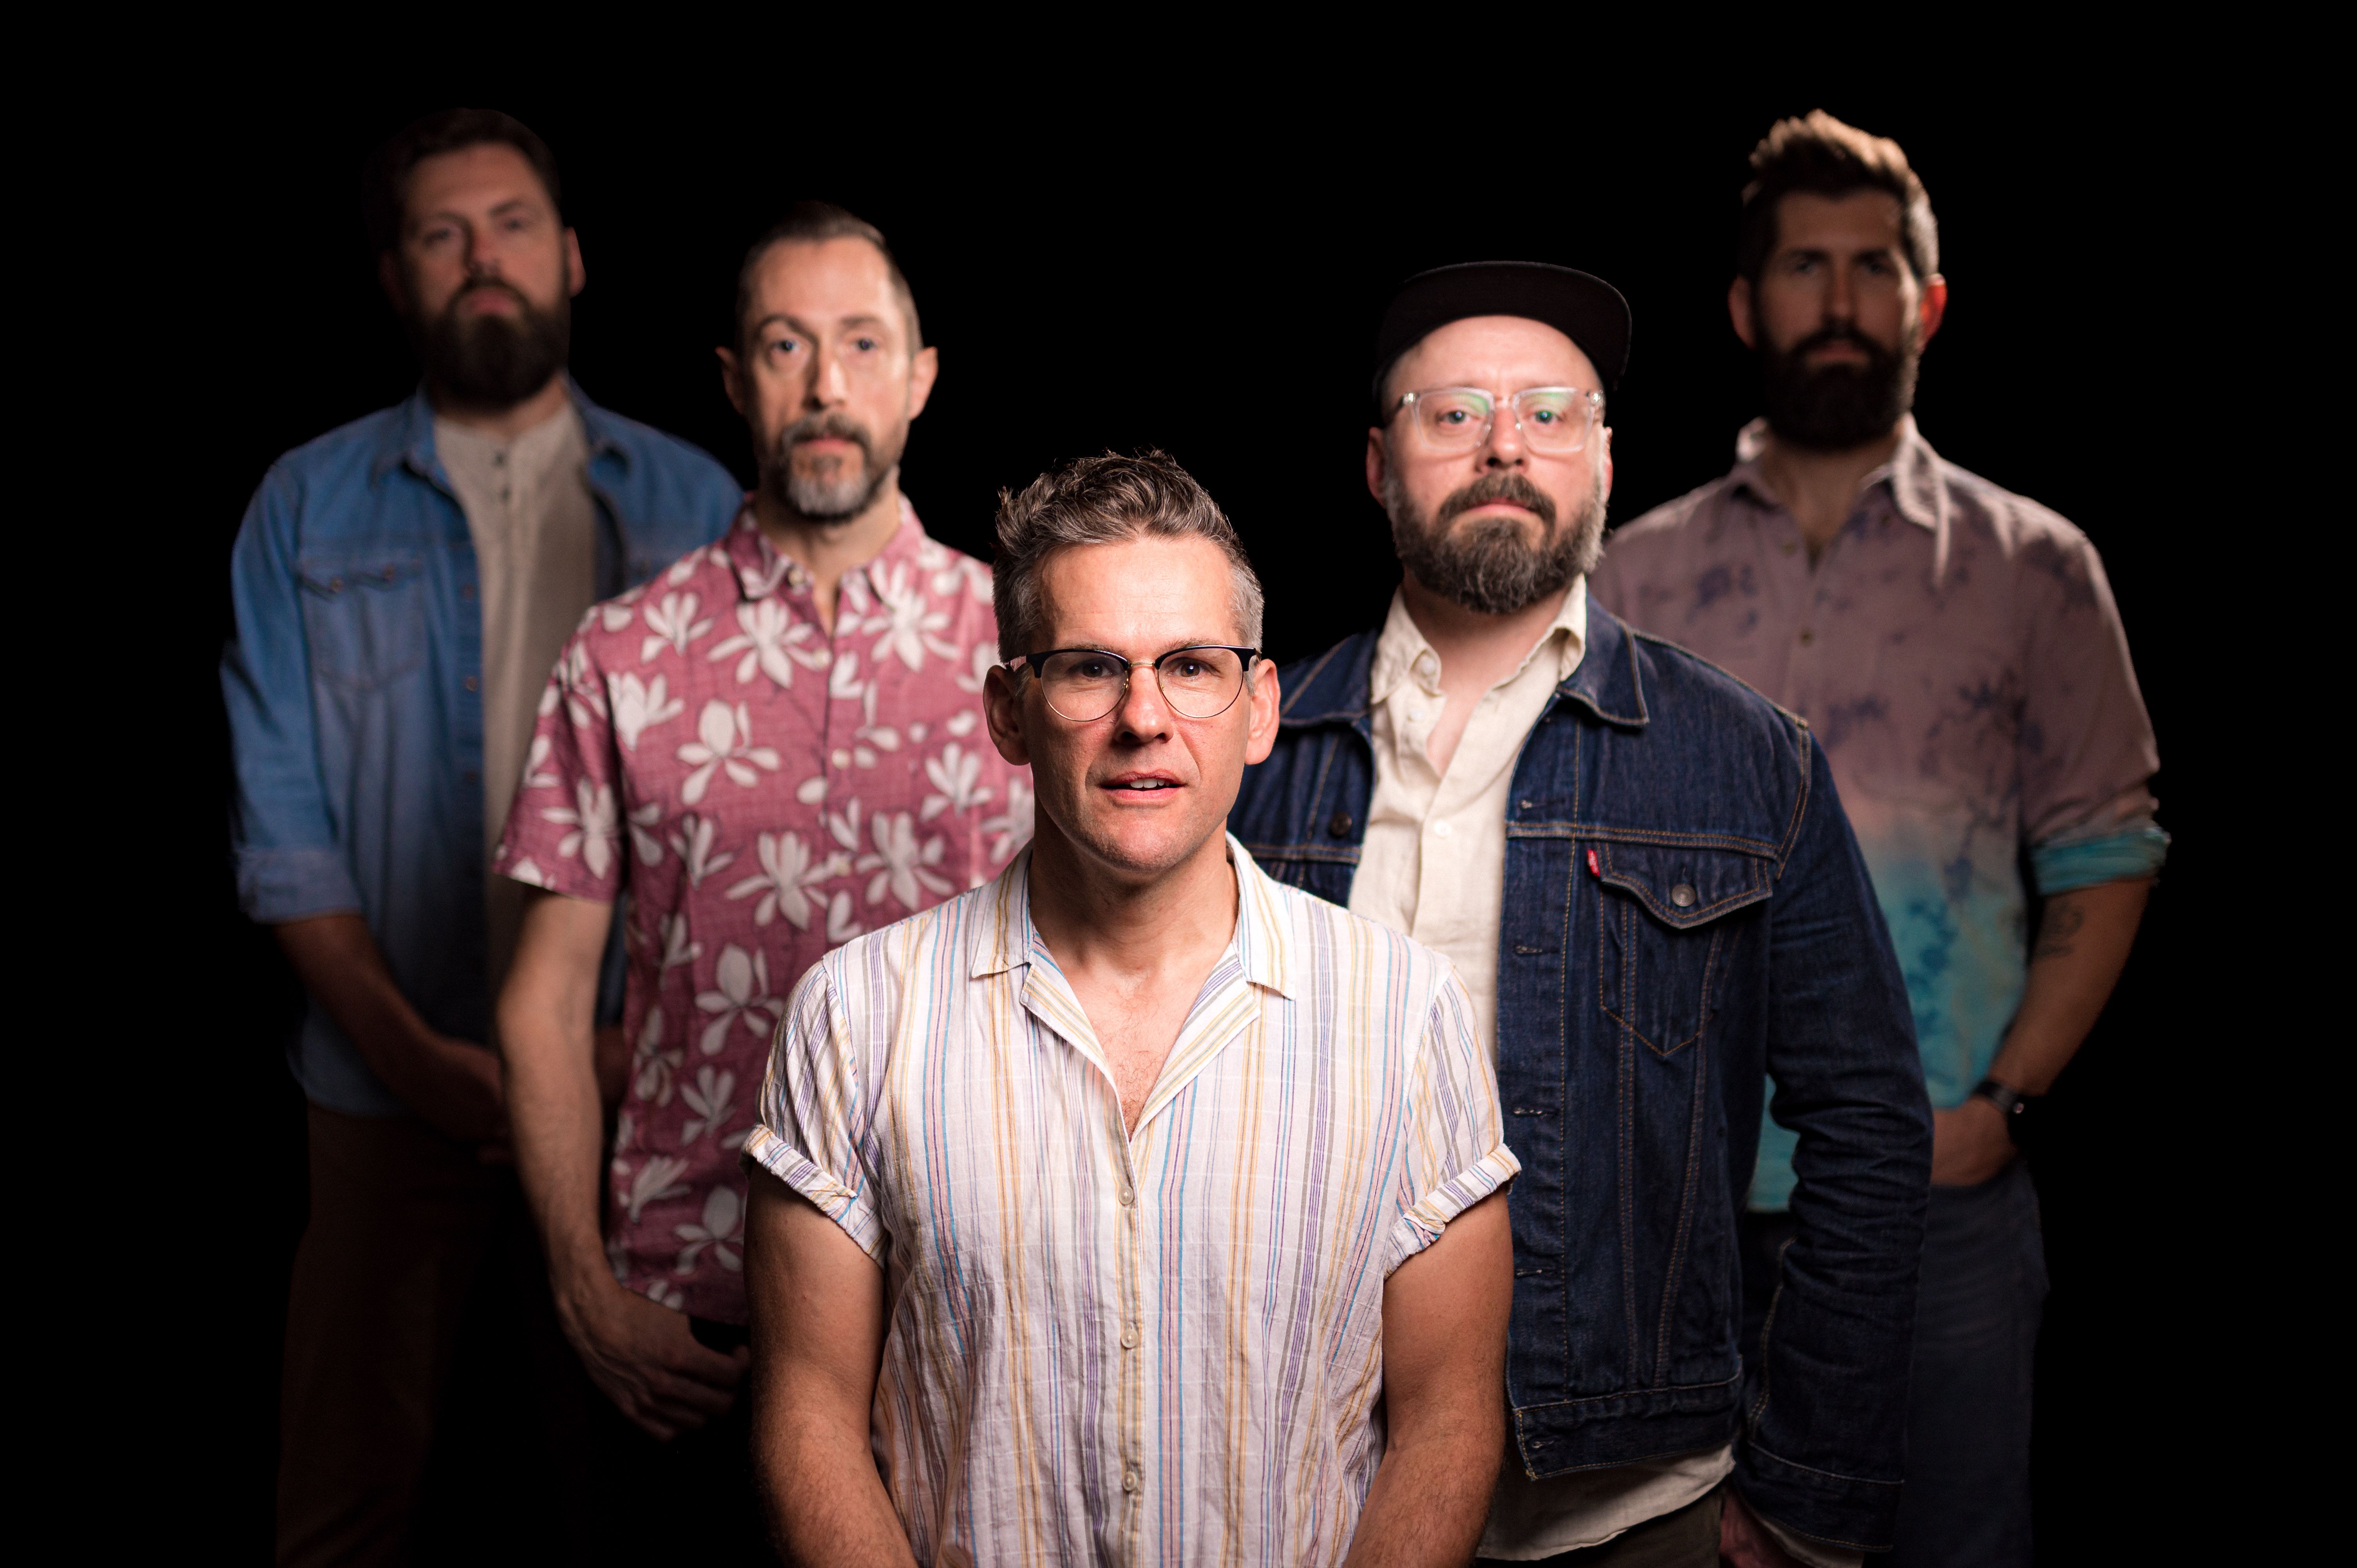 The Steel Wheels tackle a new phase of parenthood on "Baby Gone," new album out 2/9